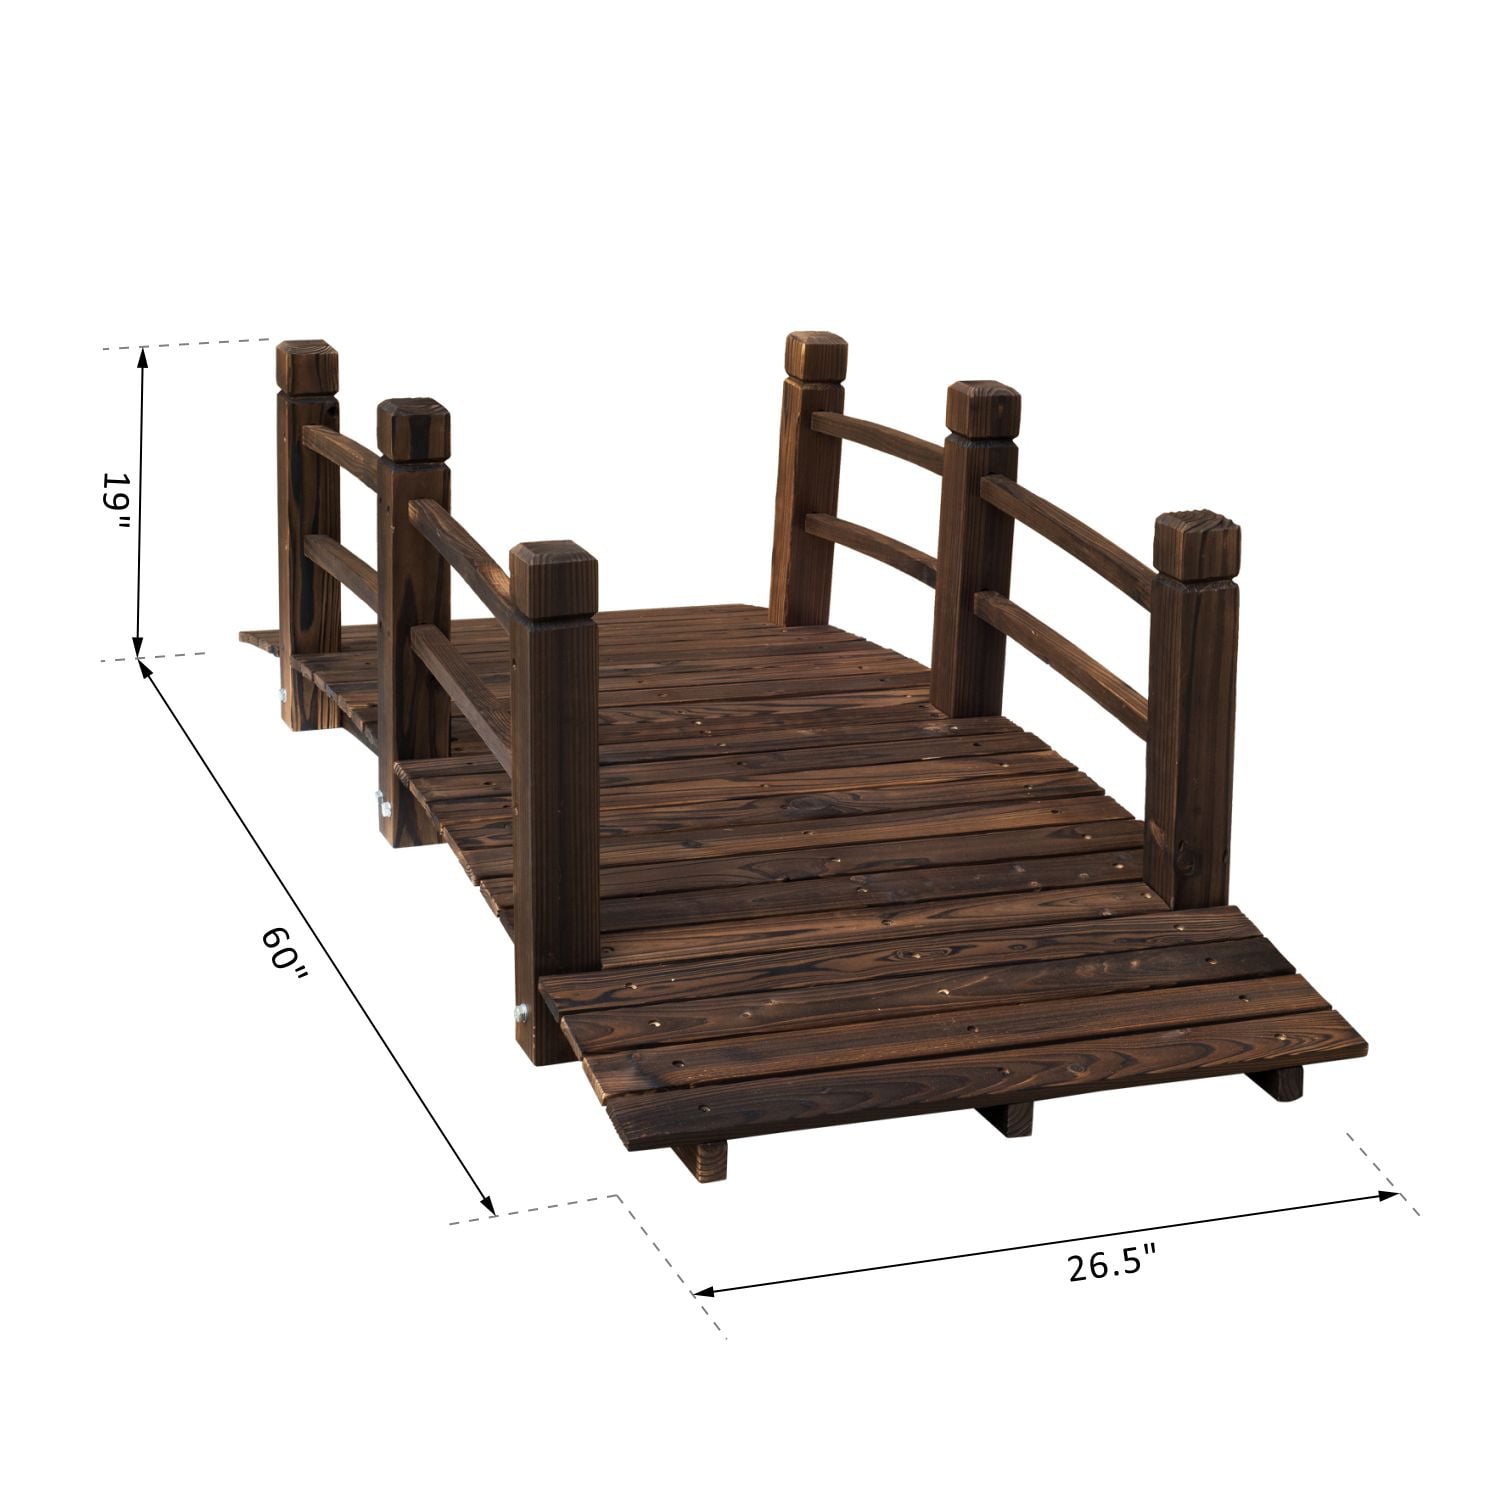 Stained Wood Decorative Pond Bridge MAXXPRIME 5 ft Wooden Garden Bridge Arc Stained Finish Footbridge with Safety Railings for Backyard 